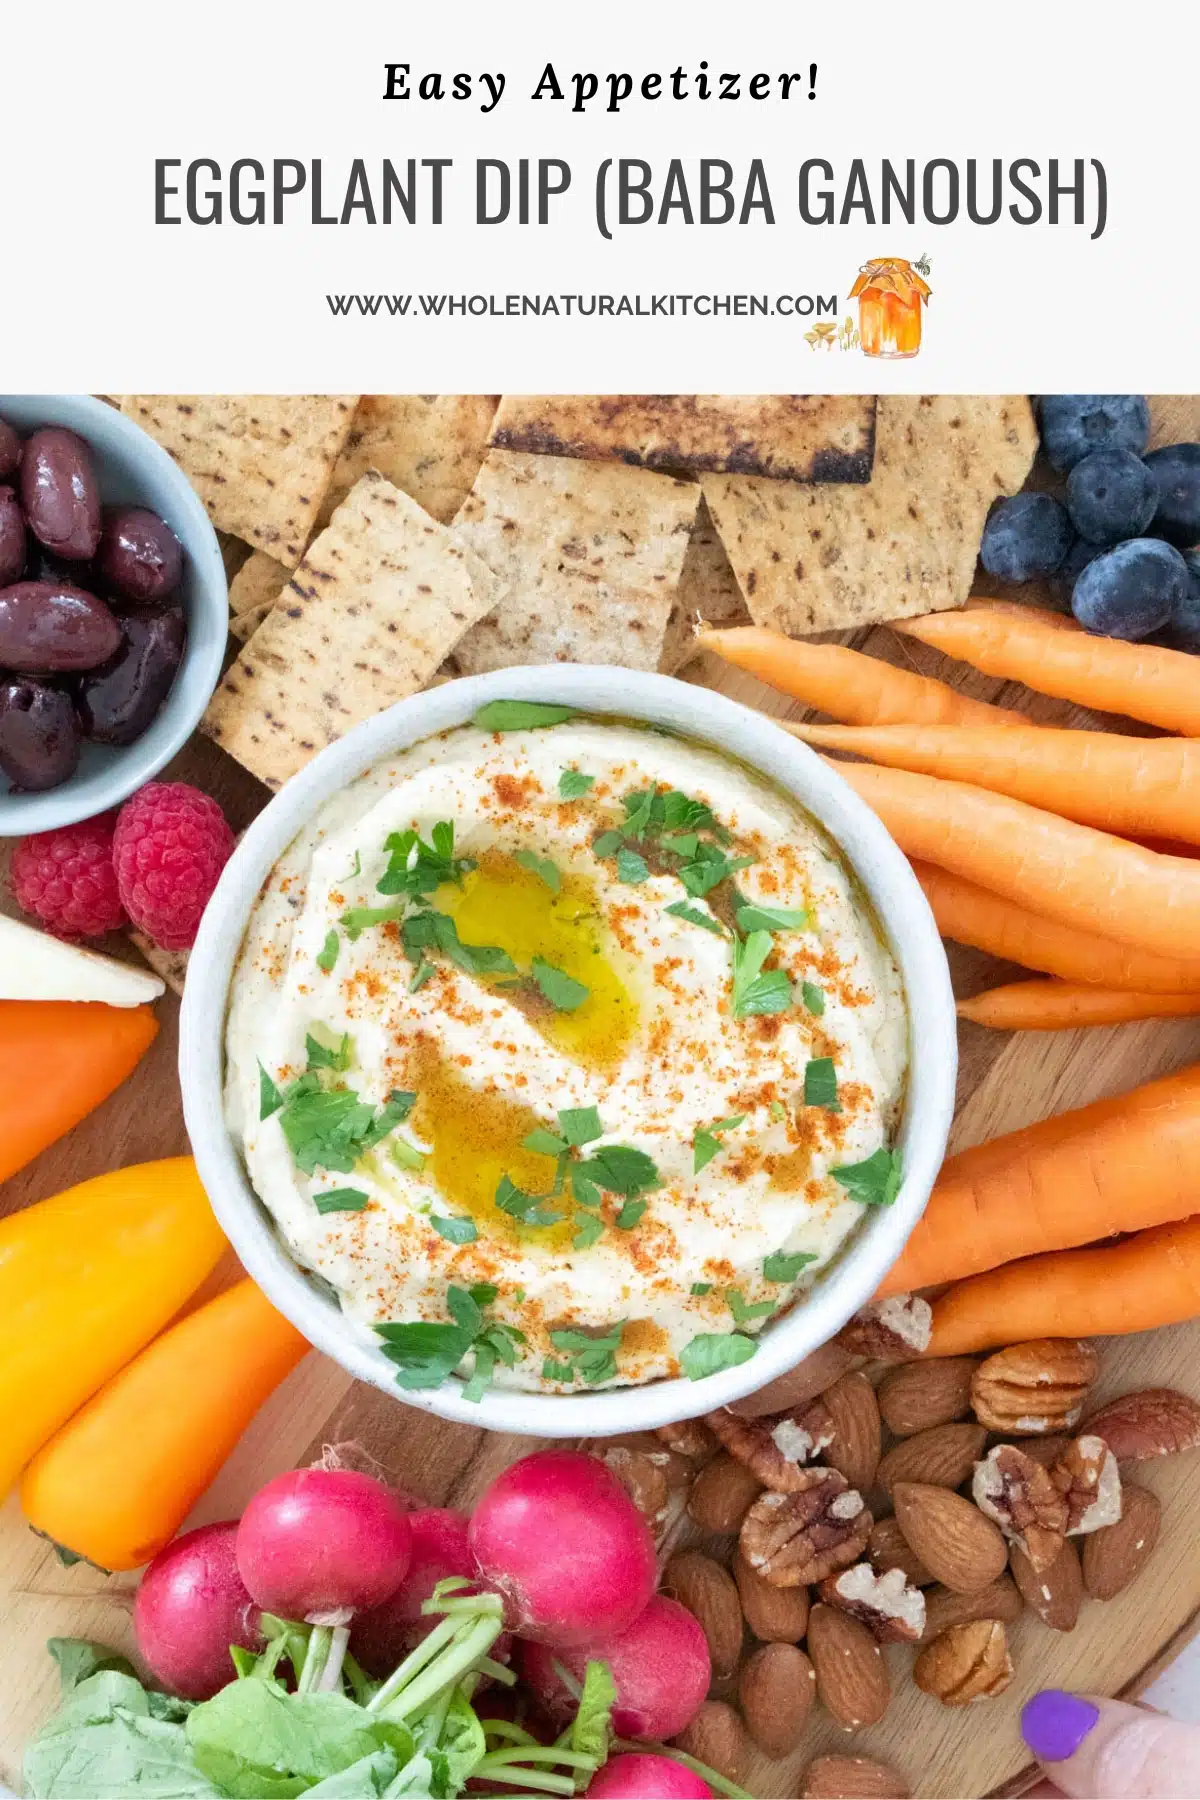 A Pinterest poster showing the name of the recipe and website at the top with the eggplant dip on a grazing board below.